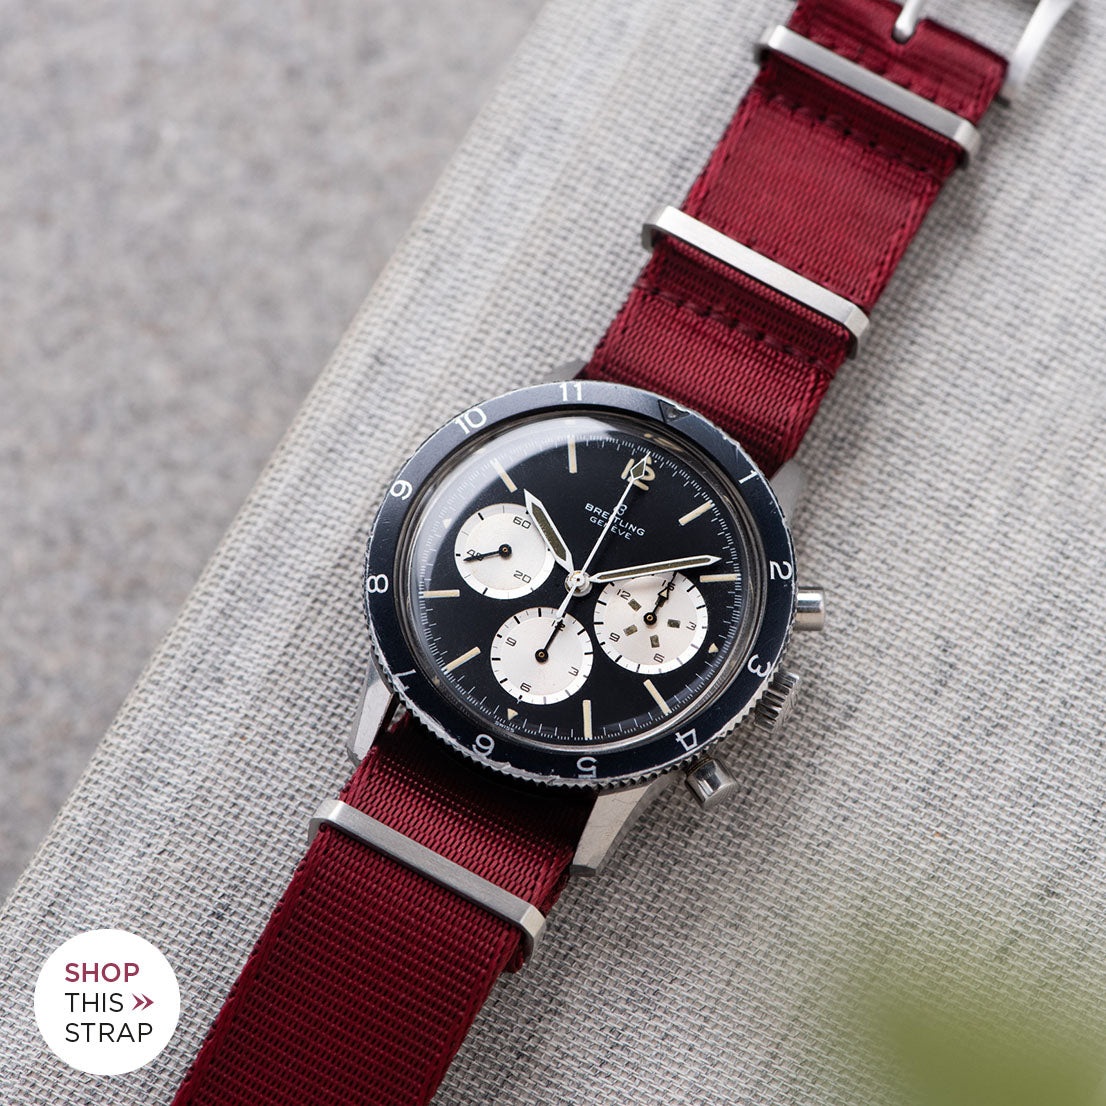 Bulang and Sons_Strap Guide_The Breitling Co-Pilot 7650 Chronograph_ Deluxe Nylon Nato Watch Strap Burgundy Red